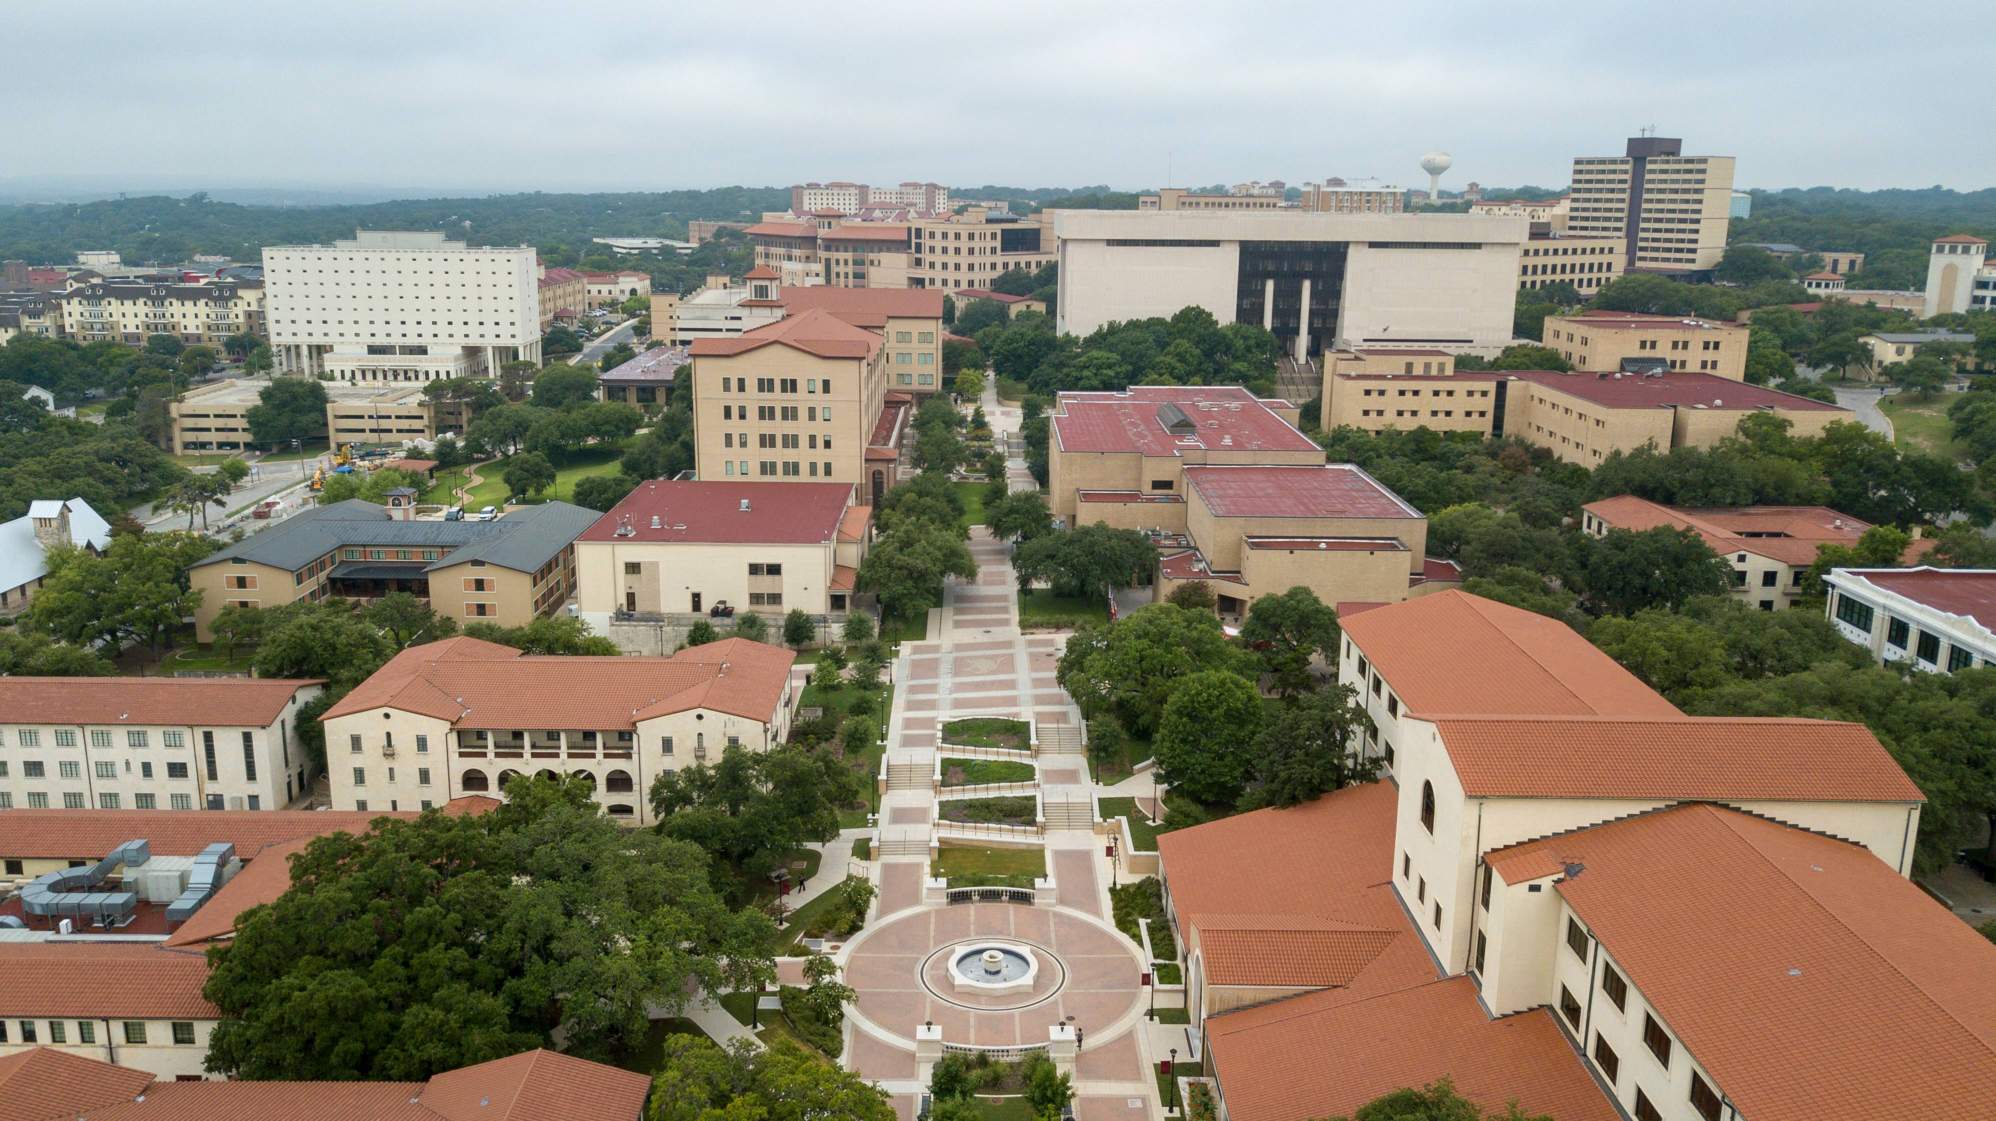 Buildings at Texas State San Marcos campus